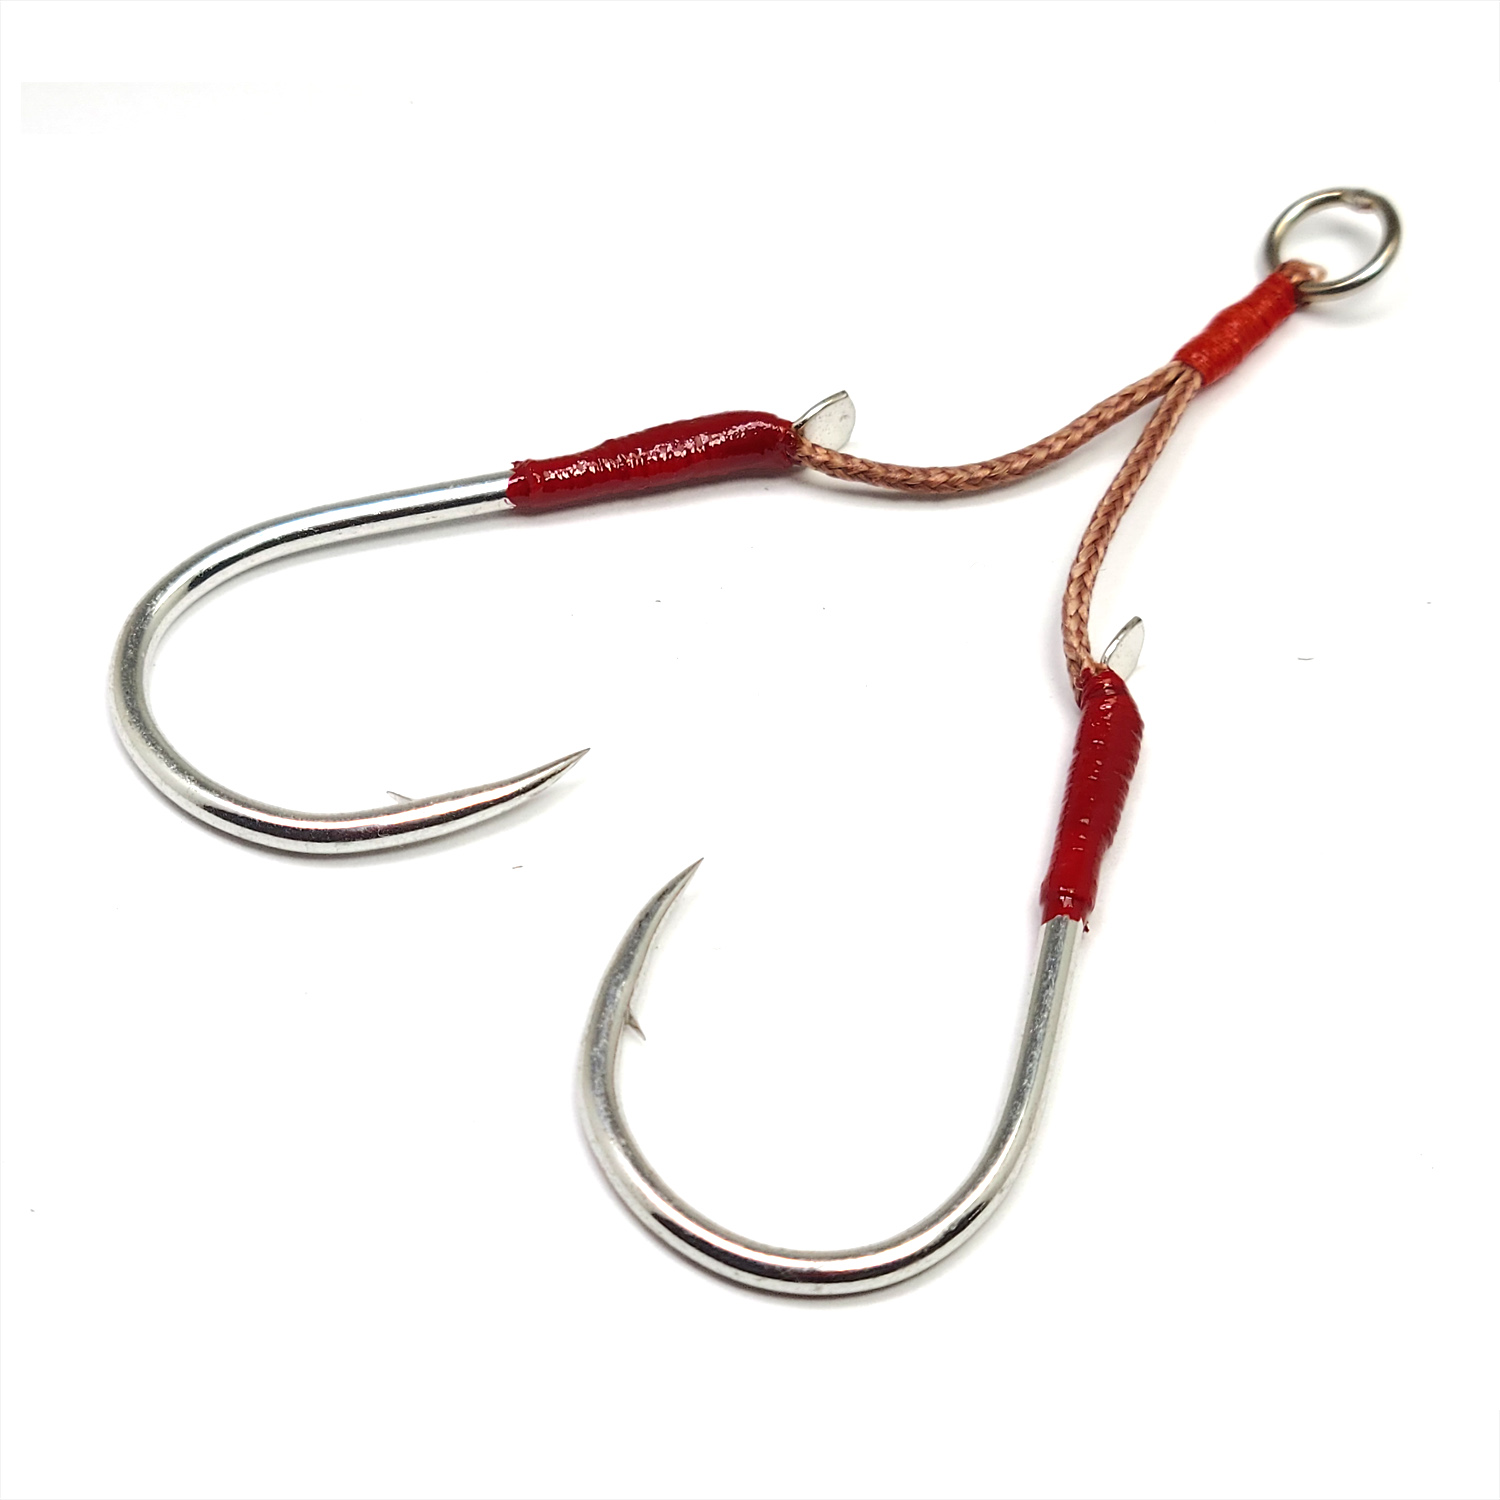 New for ICAST: Gamakatsu® Introduces Three Exciting New Jig Hooks